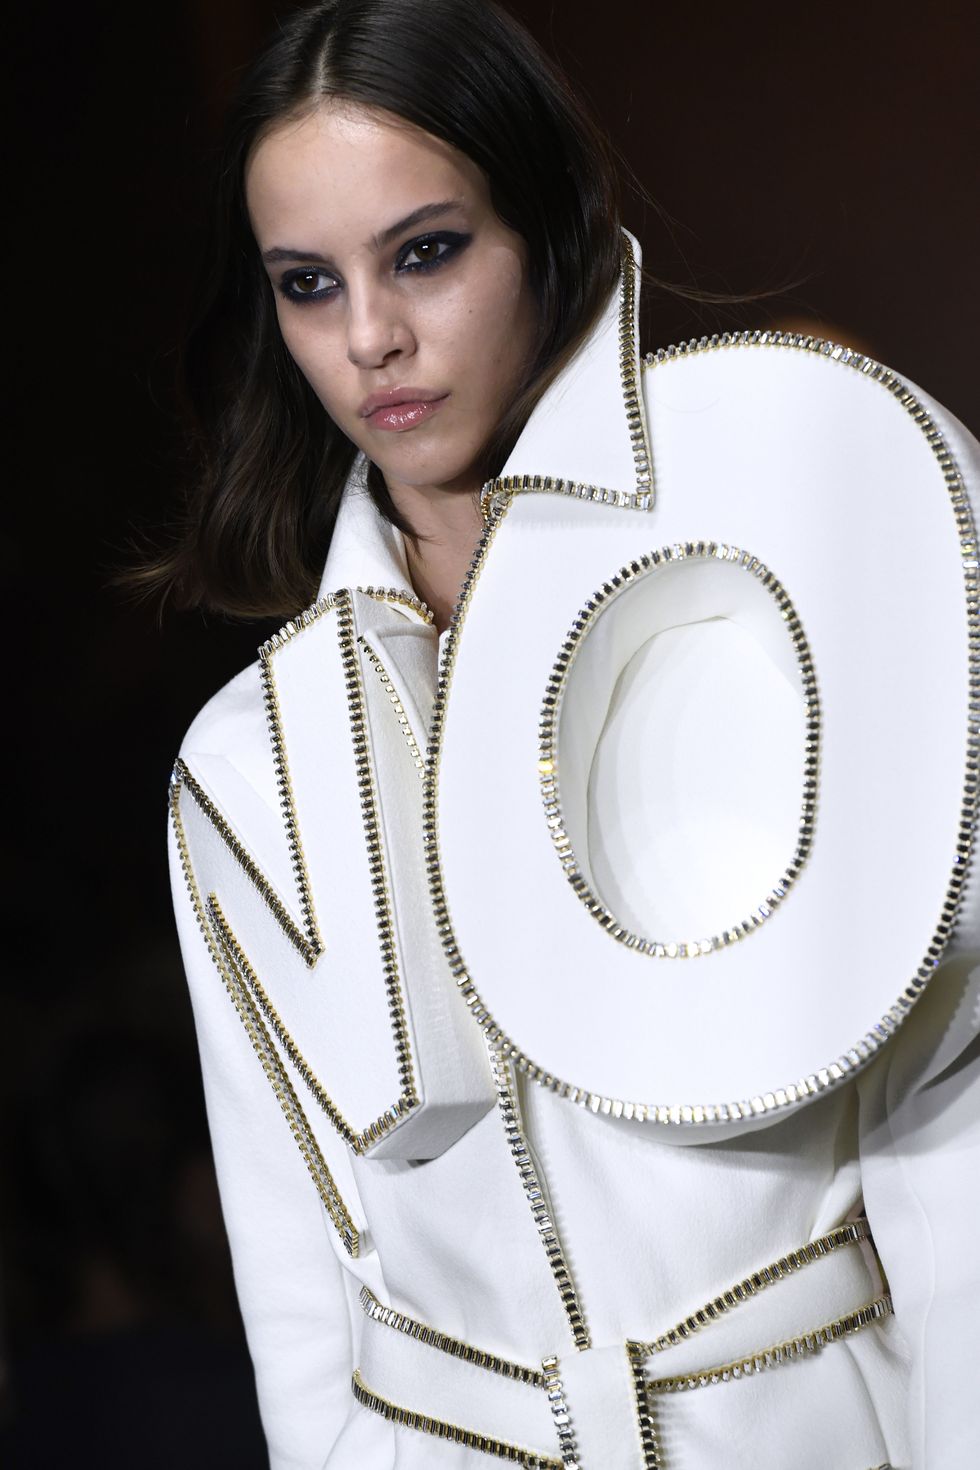 a model presents a creation by viktor and rolf during the 2018 2019 fallwinter haute couture collection fashion show in paris, on july 4, 2018 photo by bertrand guay afp photo by bertrand guayafp via getty images